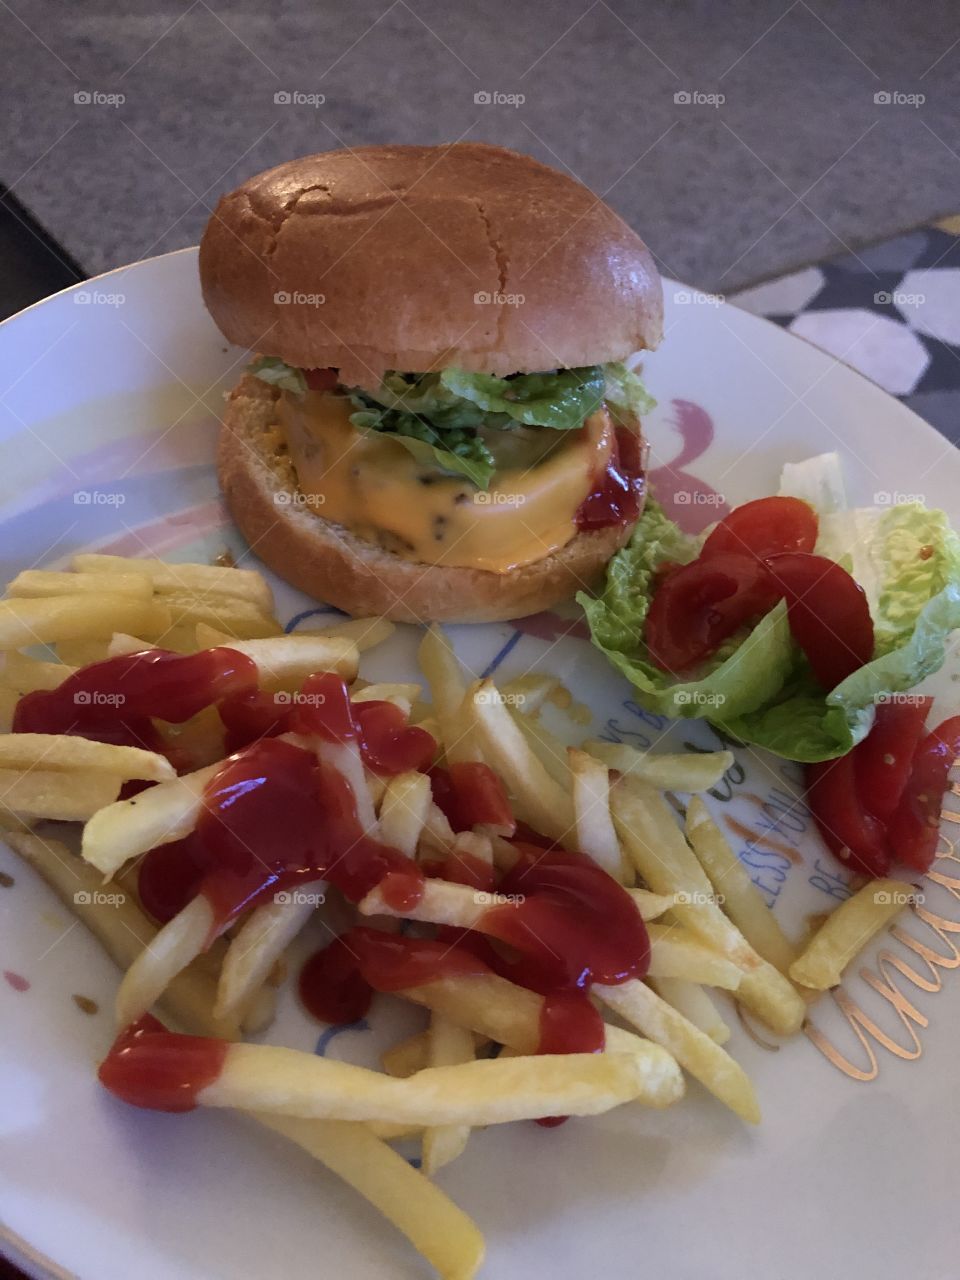 Homemade cheese burger with ketchup on fries and side salad 